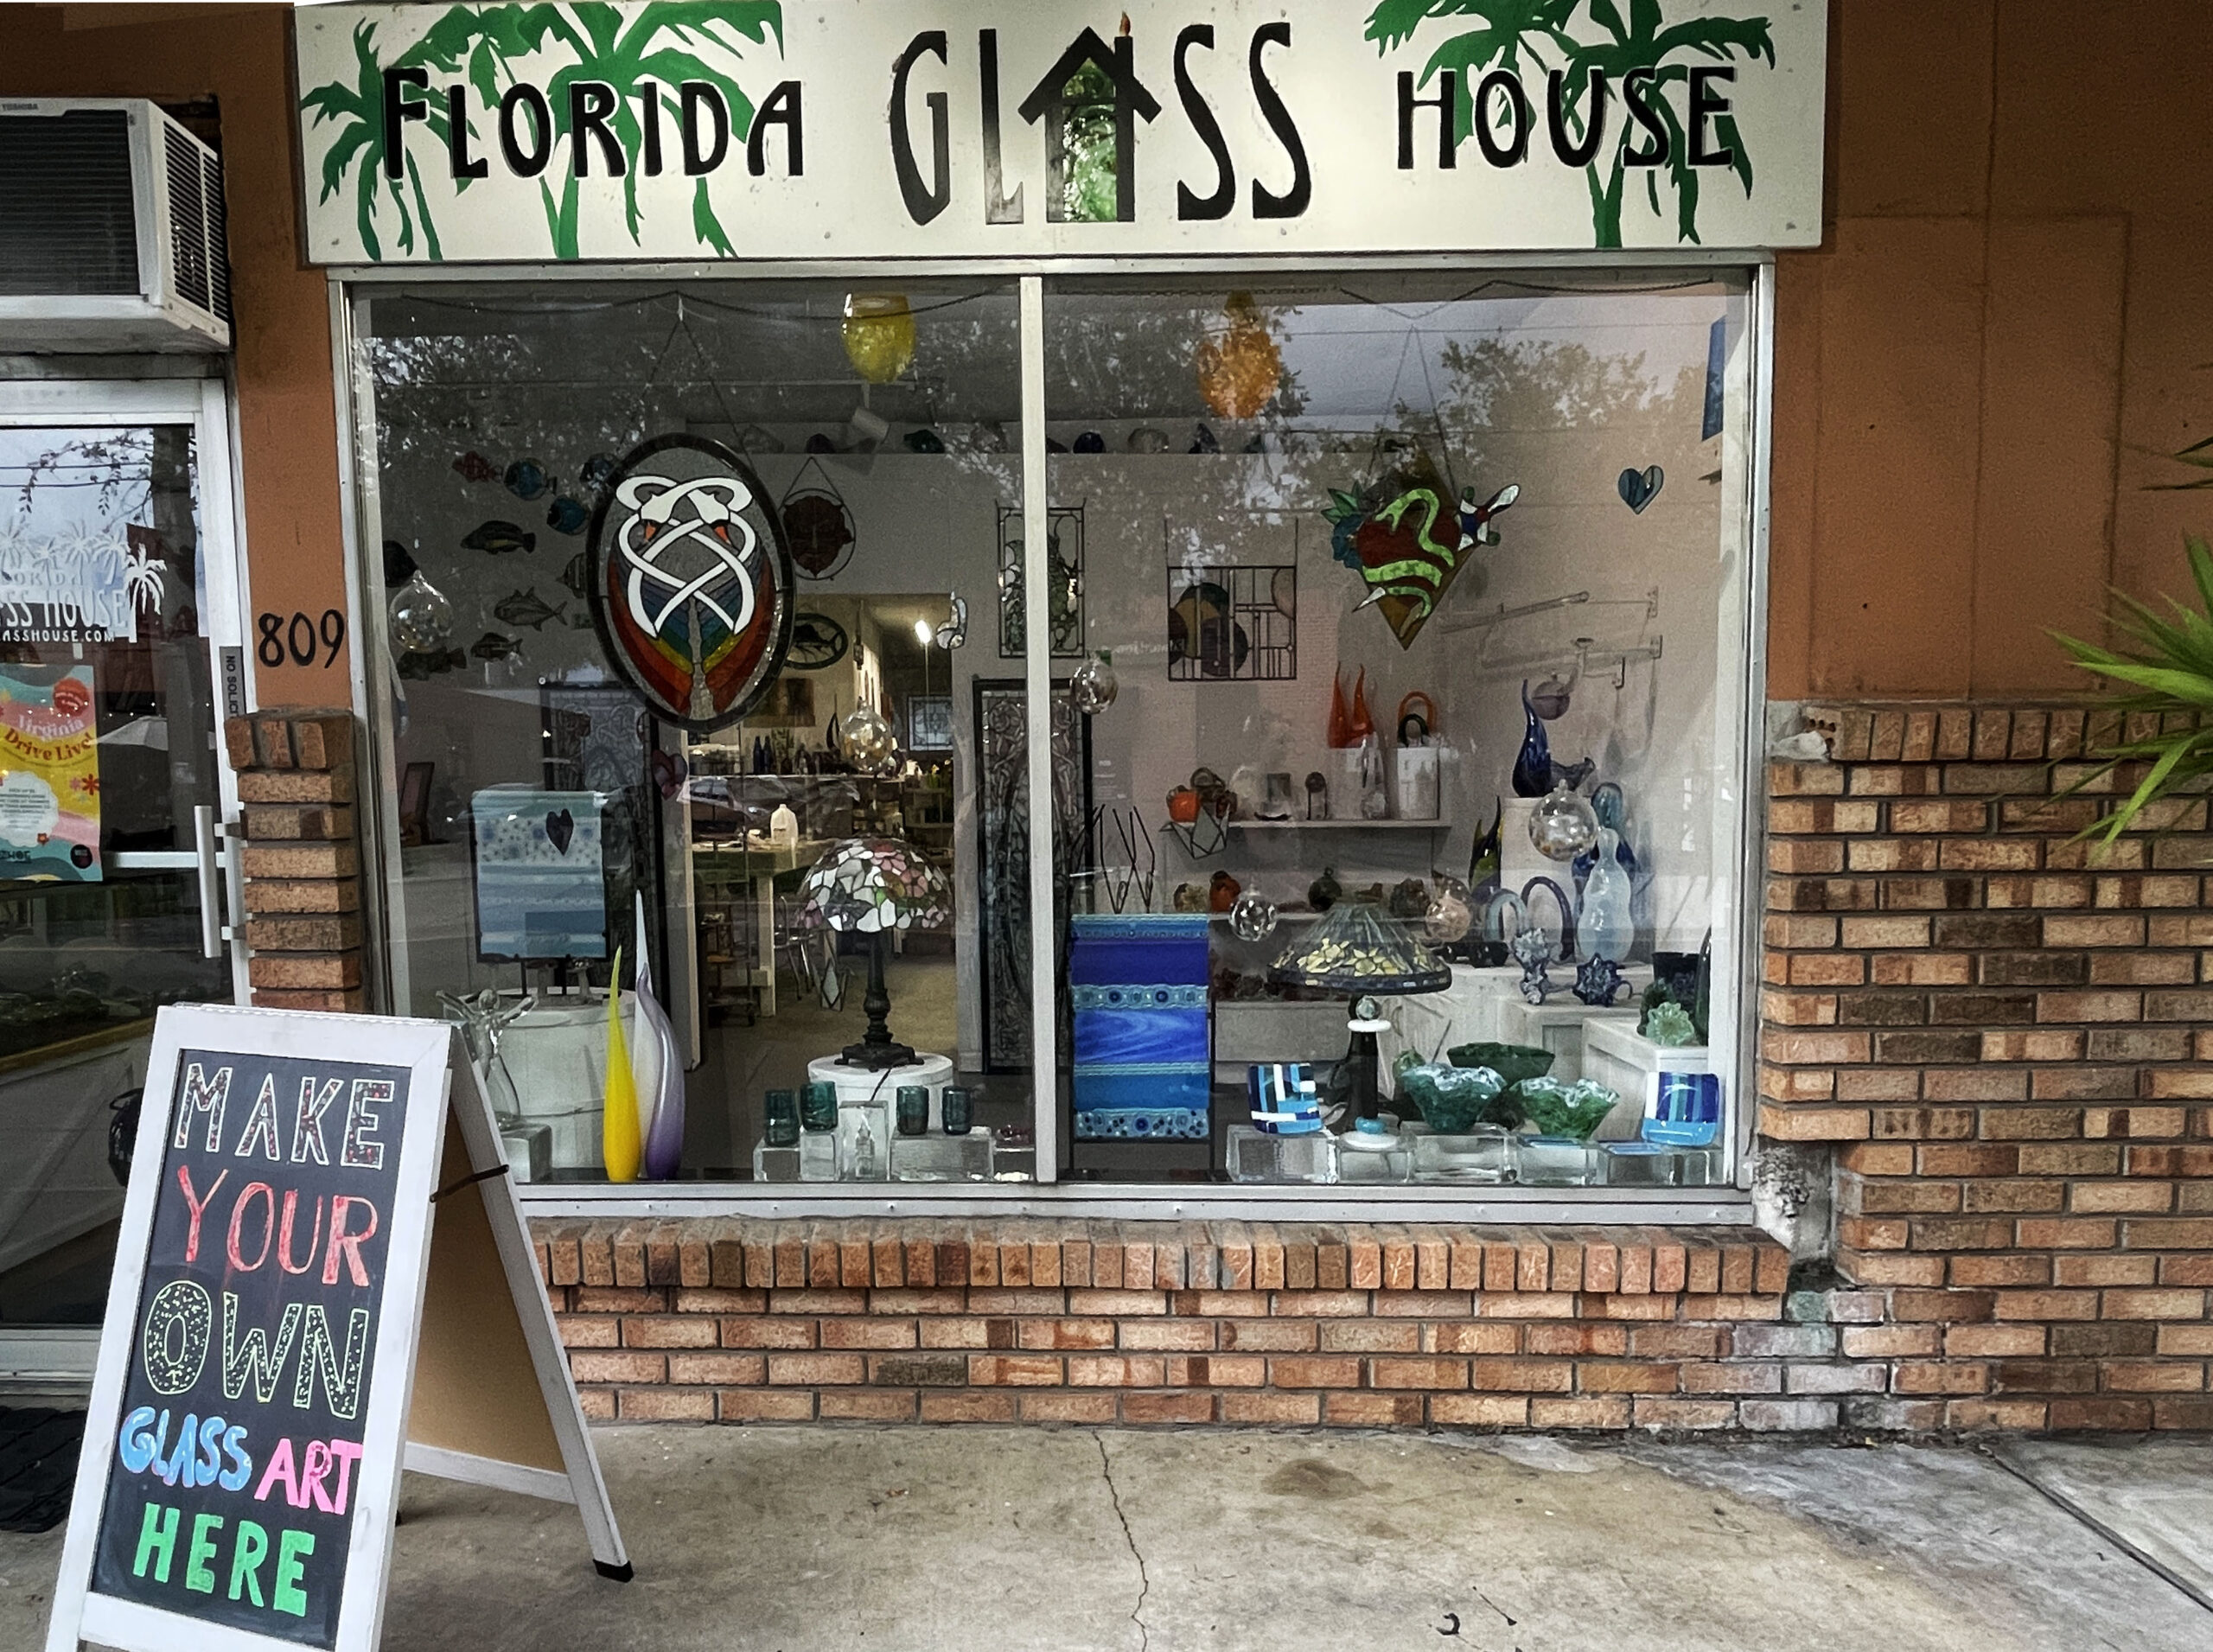 Florida Glass House storefront. Brick wall with a large display window with glass art. Signs read 'Florida Glass House,' and 'Make your own glass art here.'